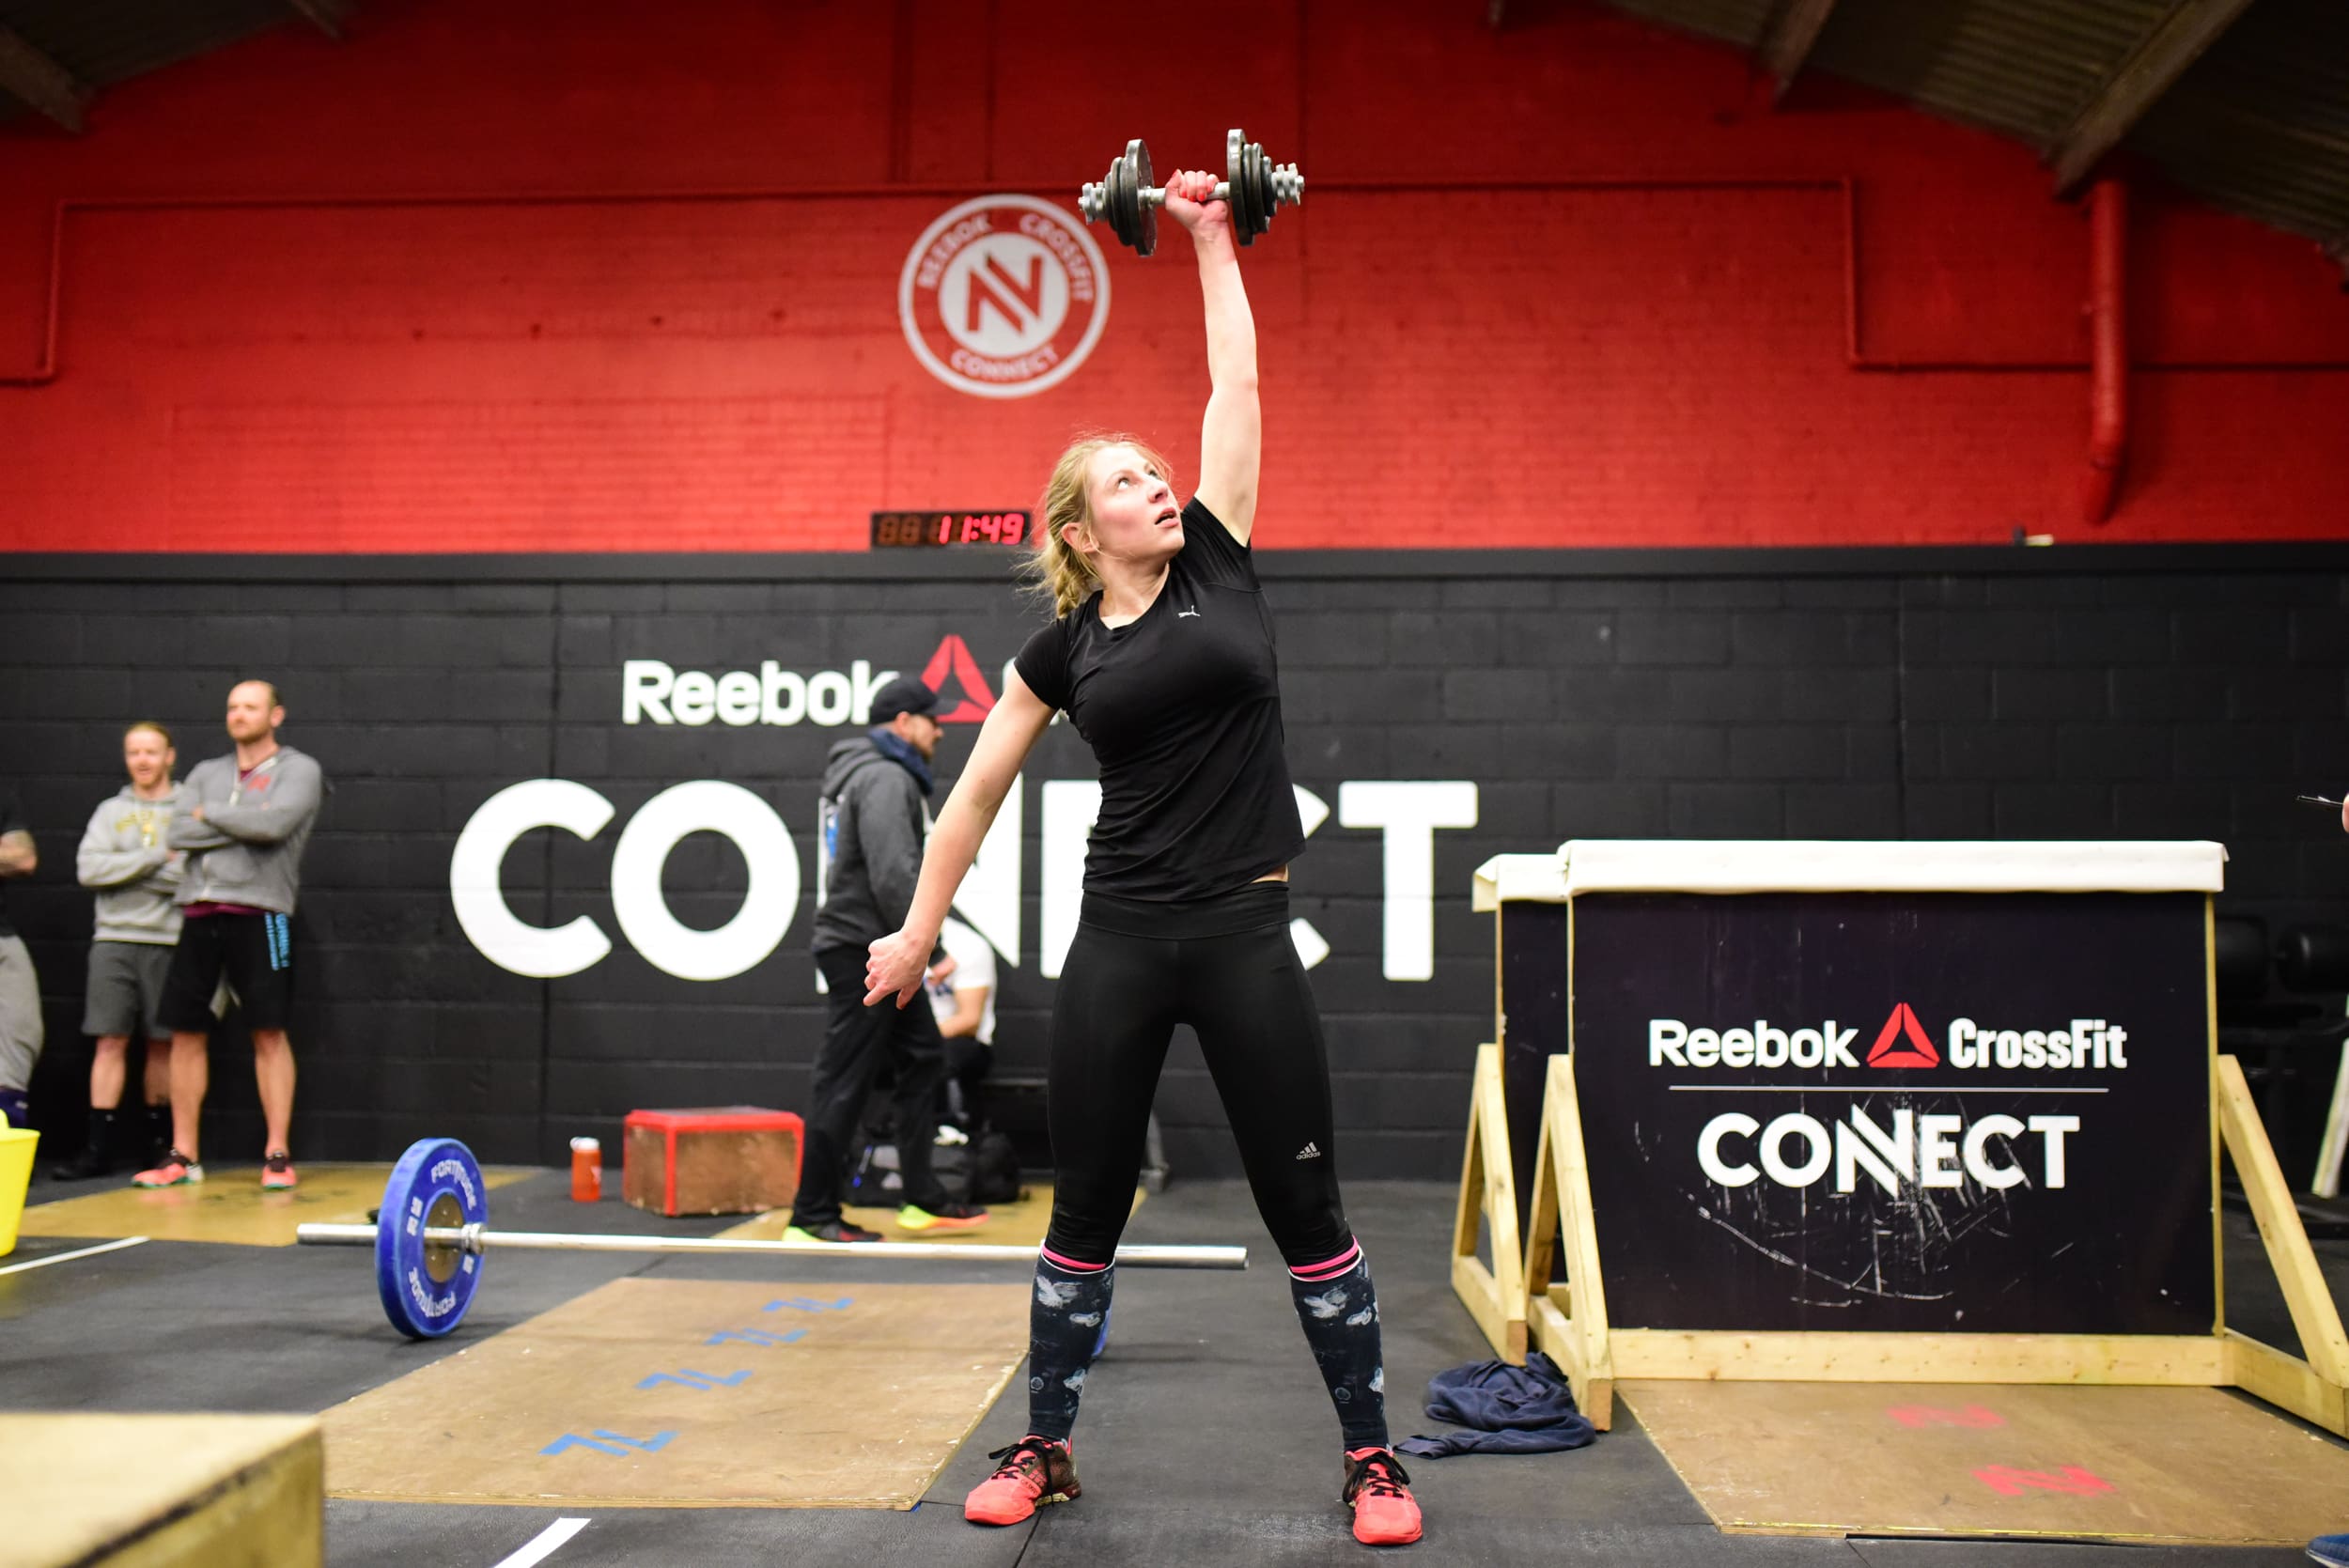 crossfit community member performs dumbbell snatch